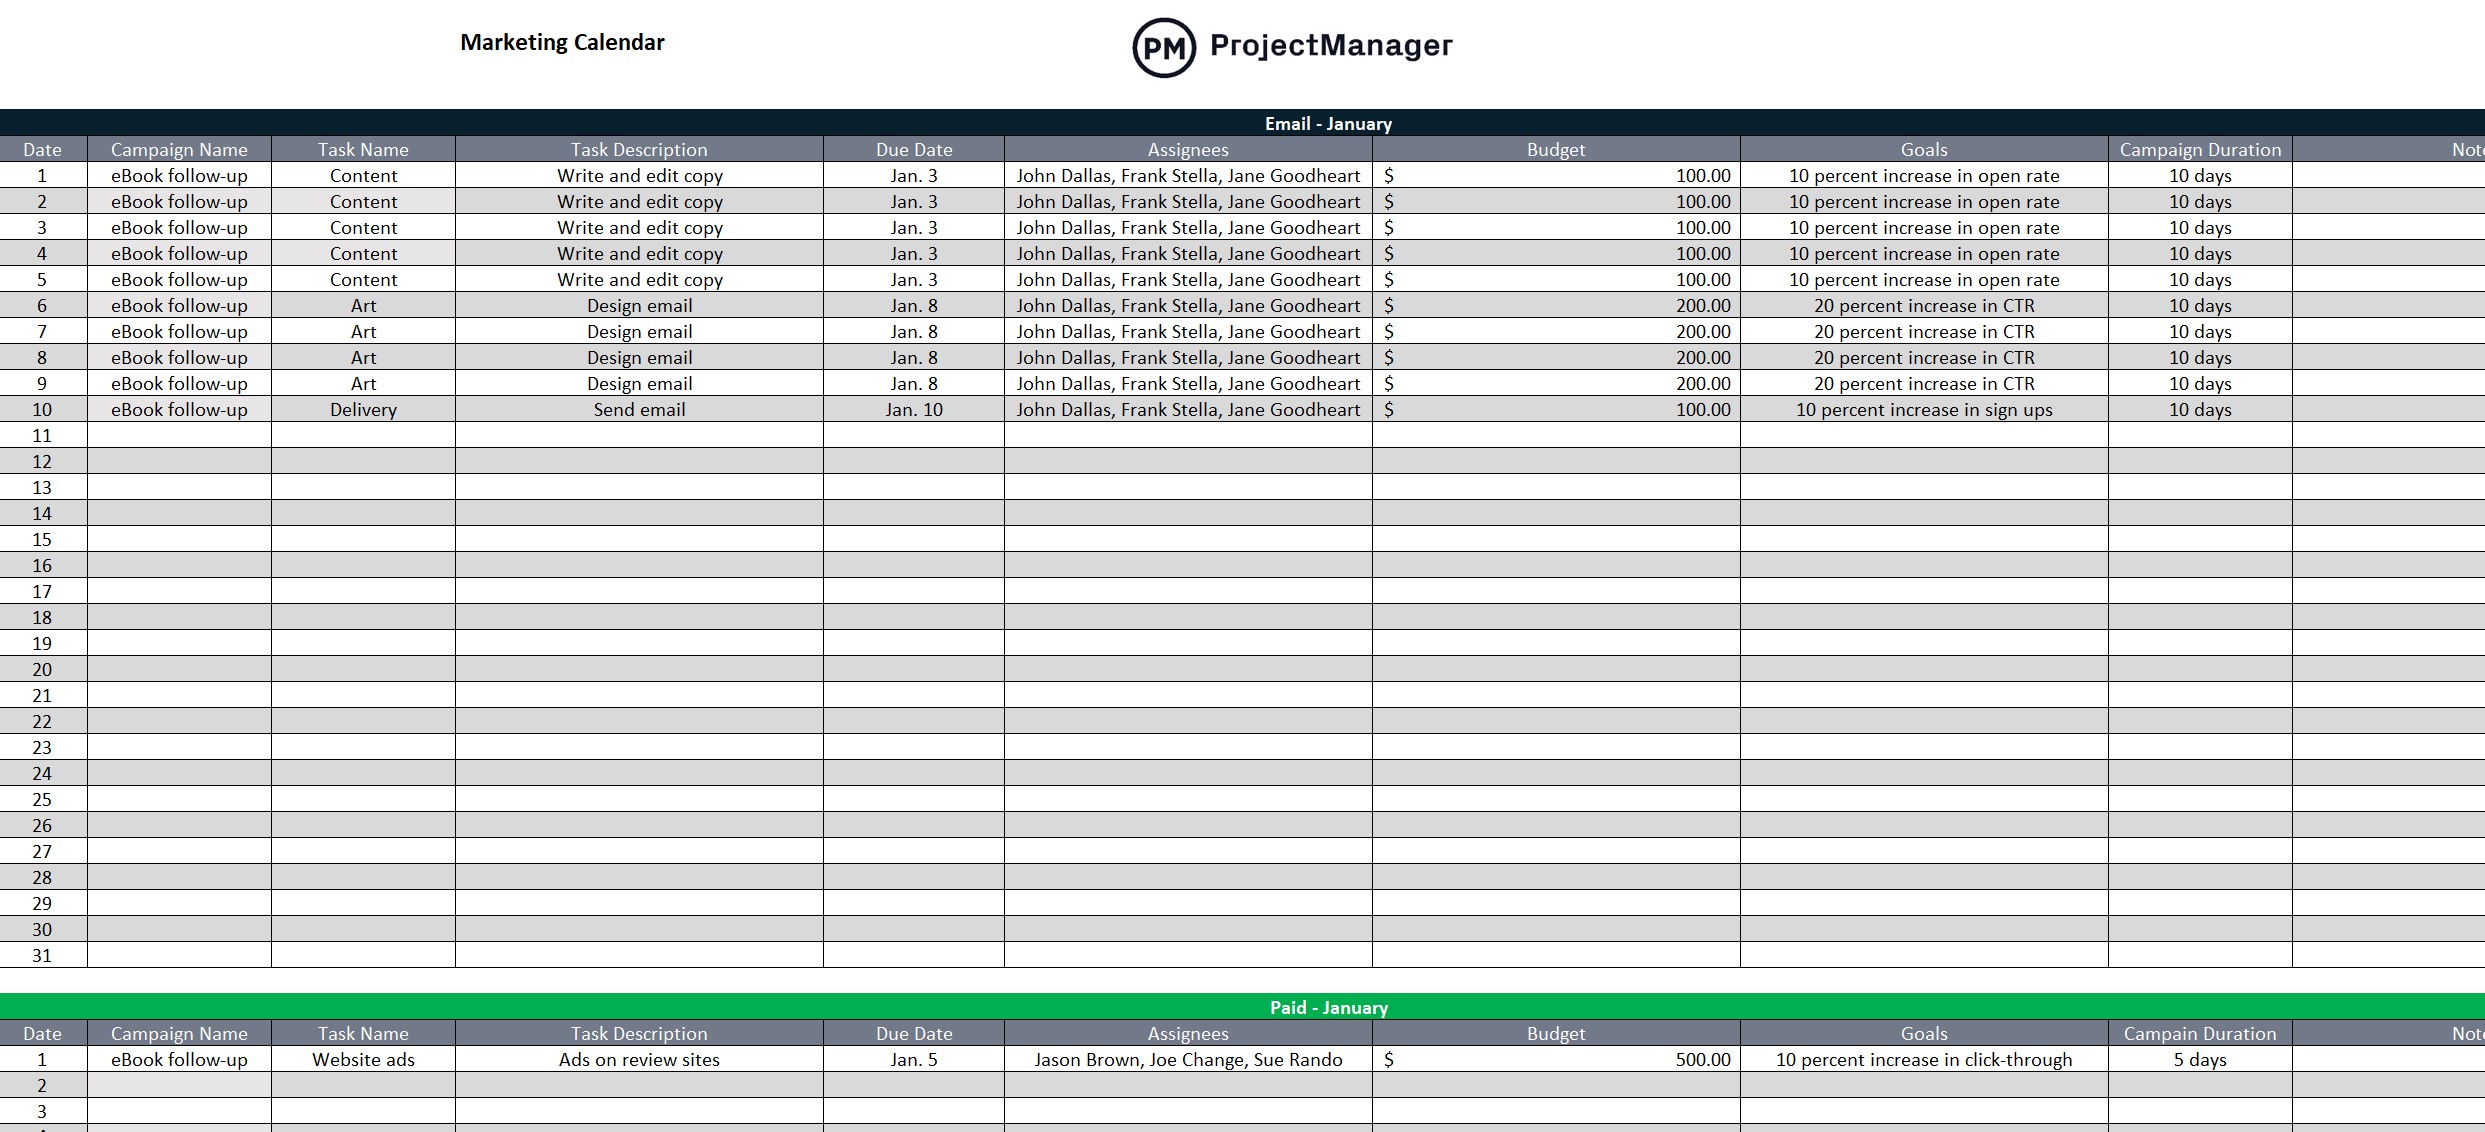 Free marketing calendar template from ProjectManager